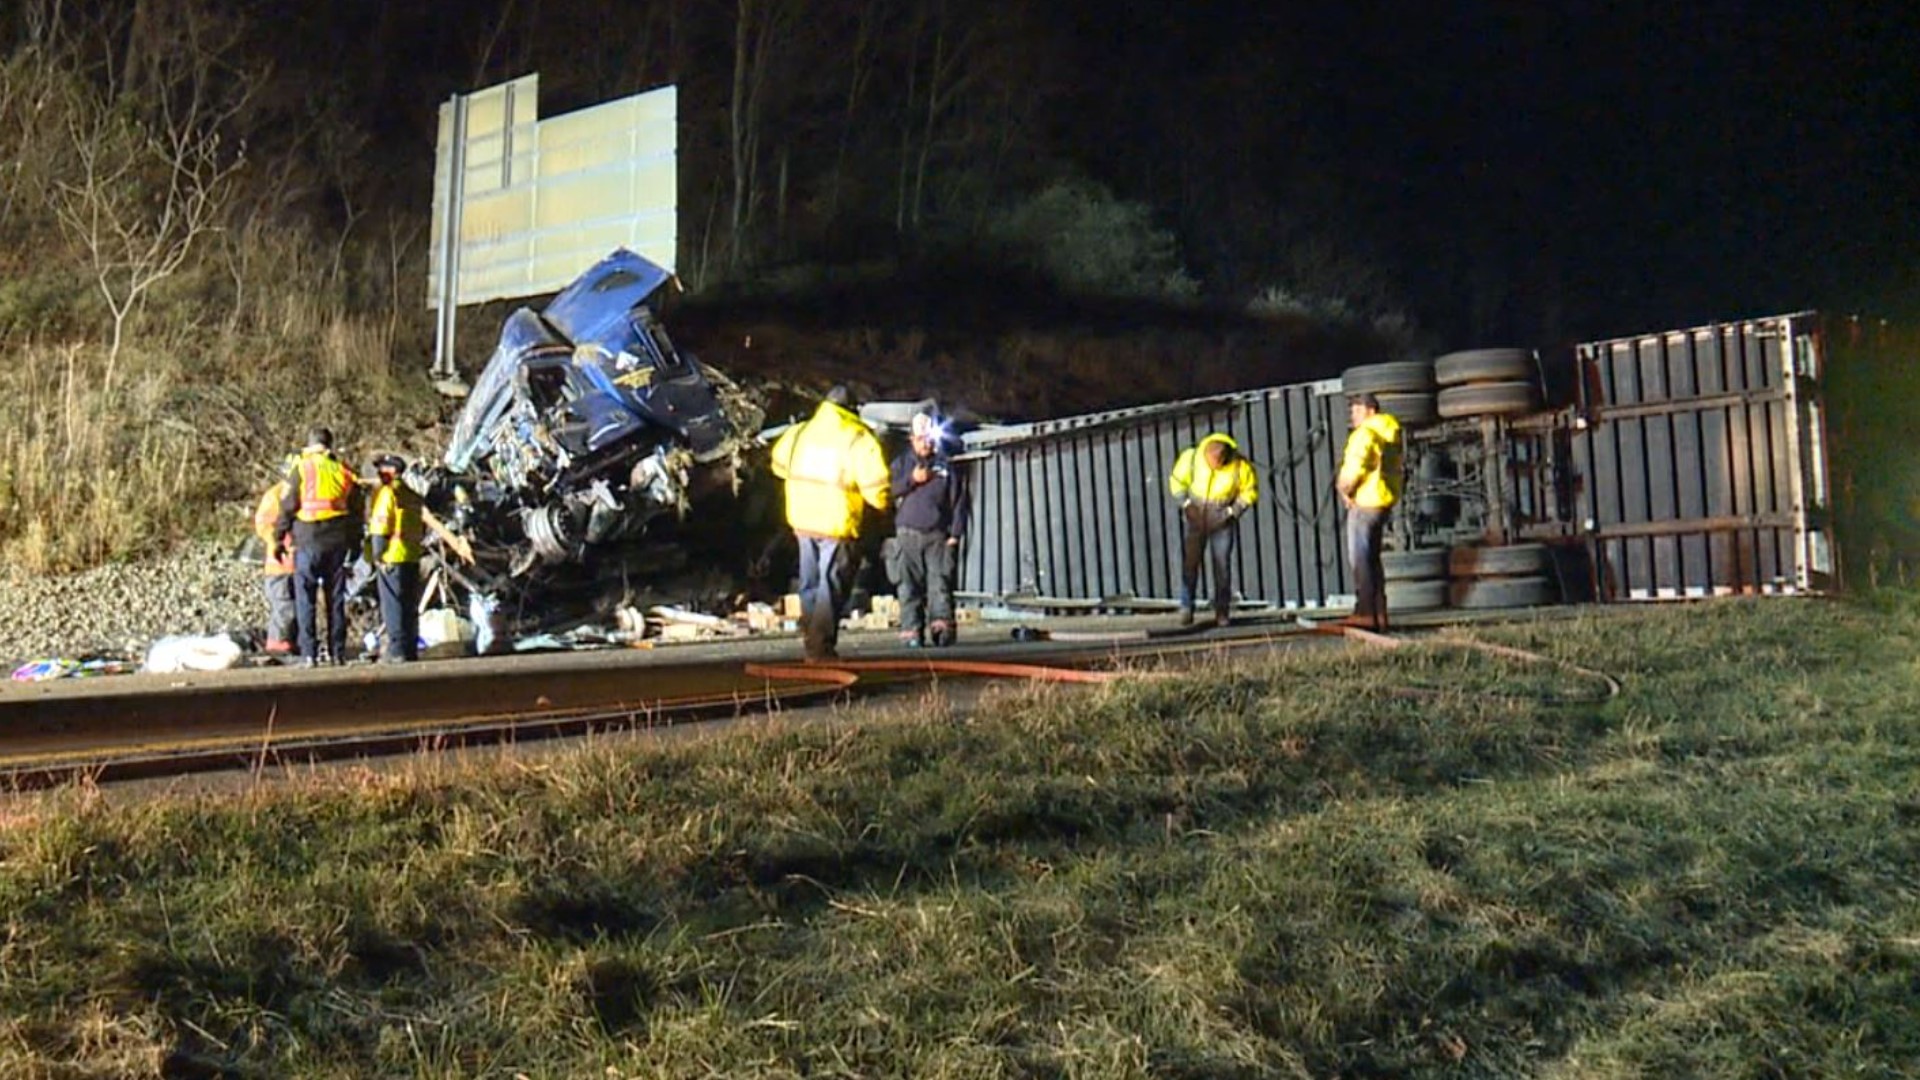 Both lanes of Interstate 81 north just outside of Clarks Summit are closed after a tractor trailer hauling Amazon packages crashed.